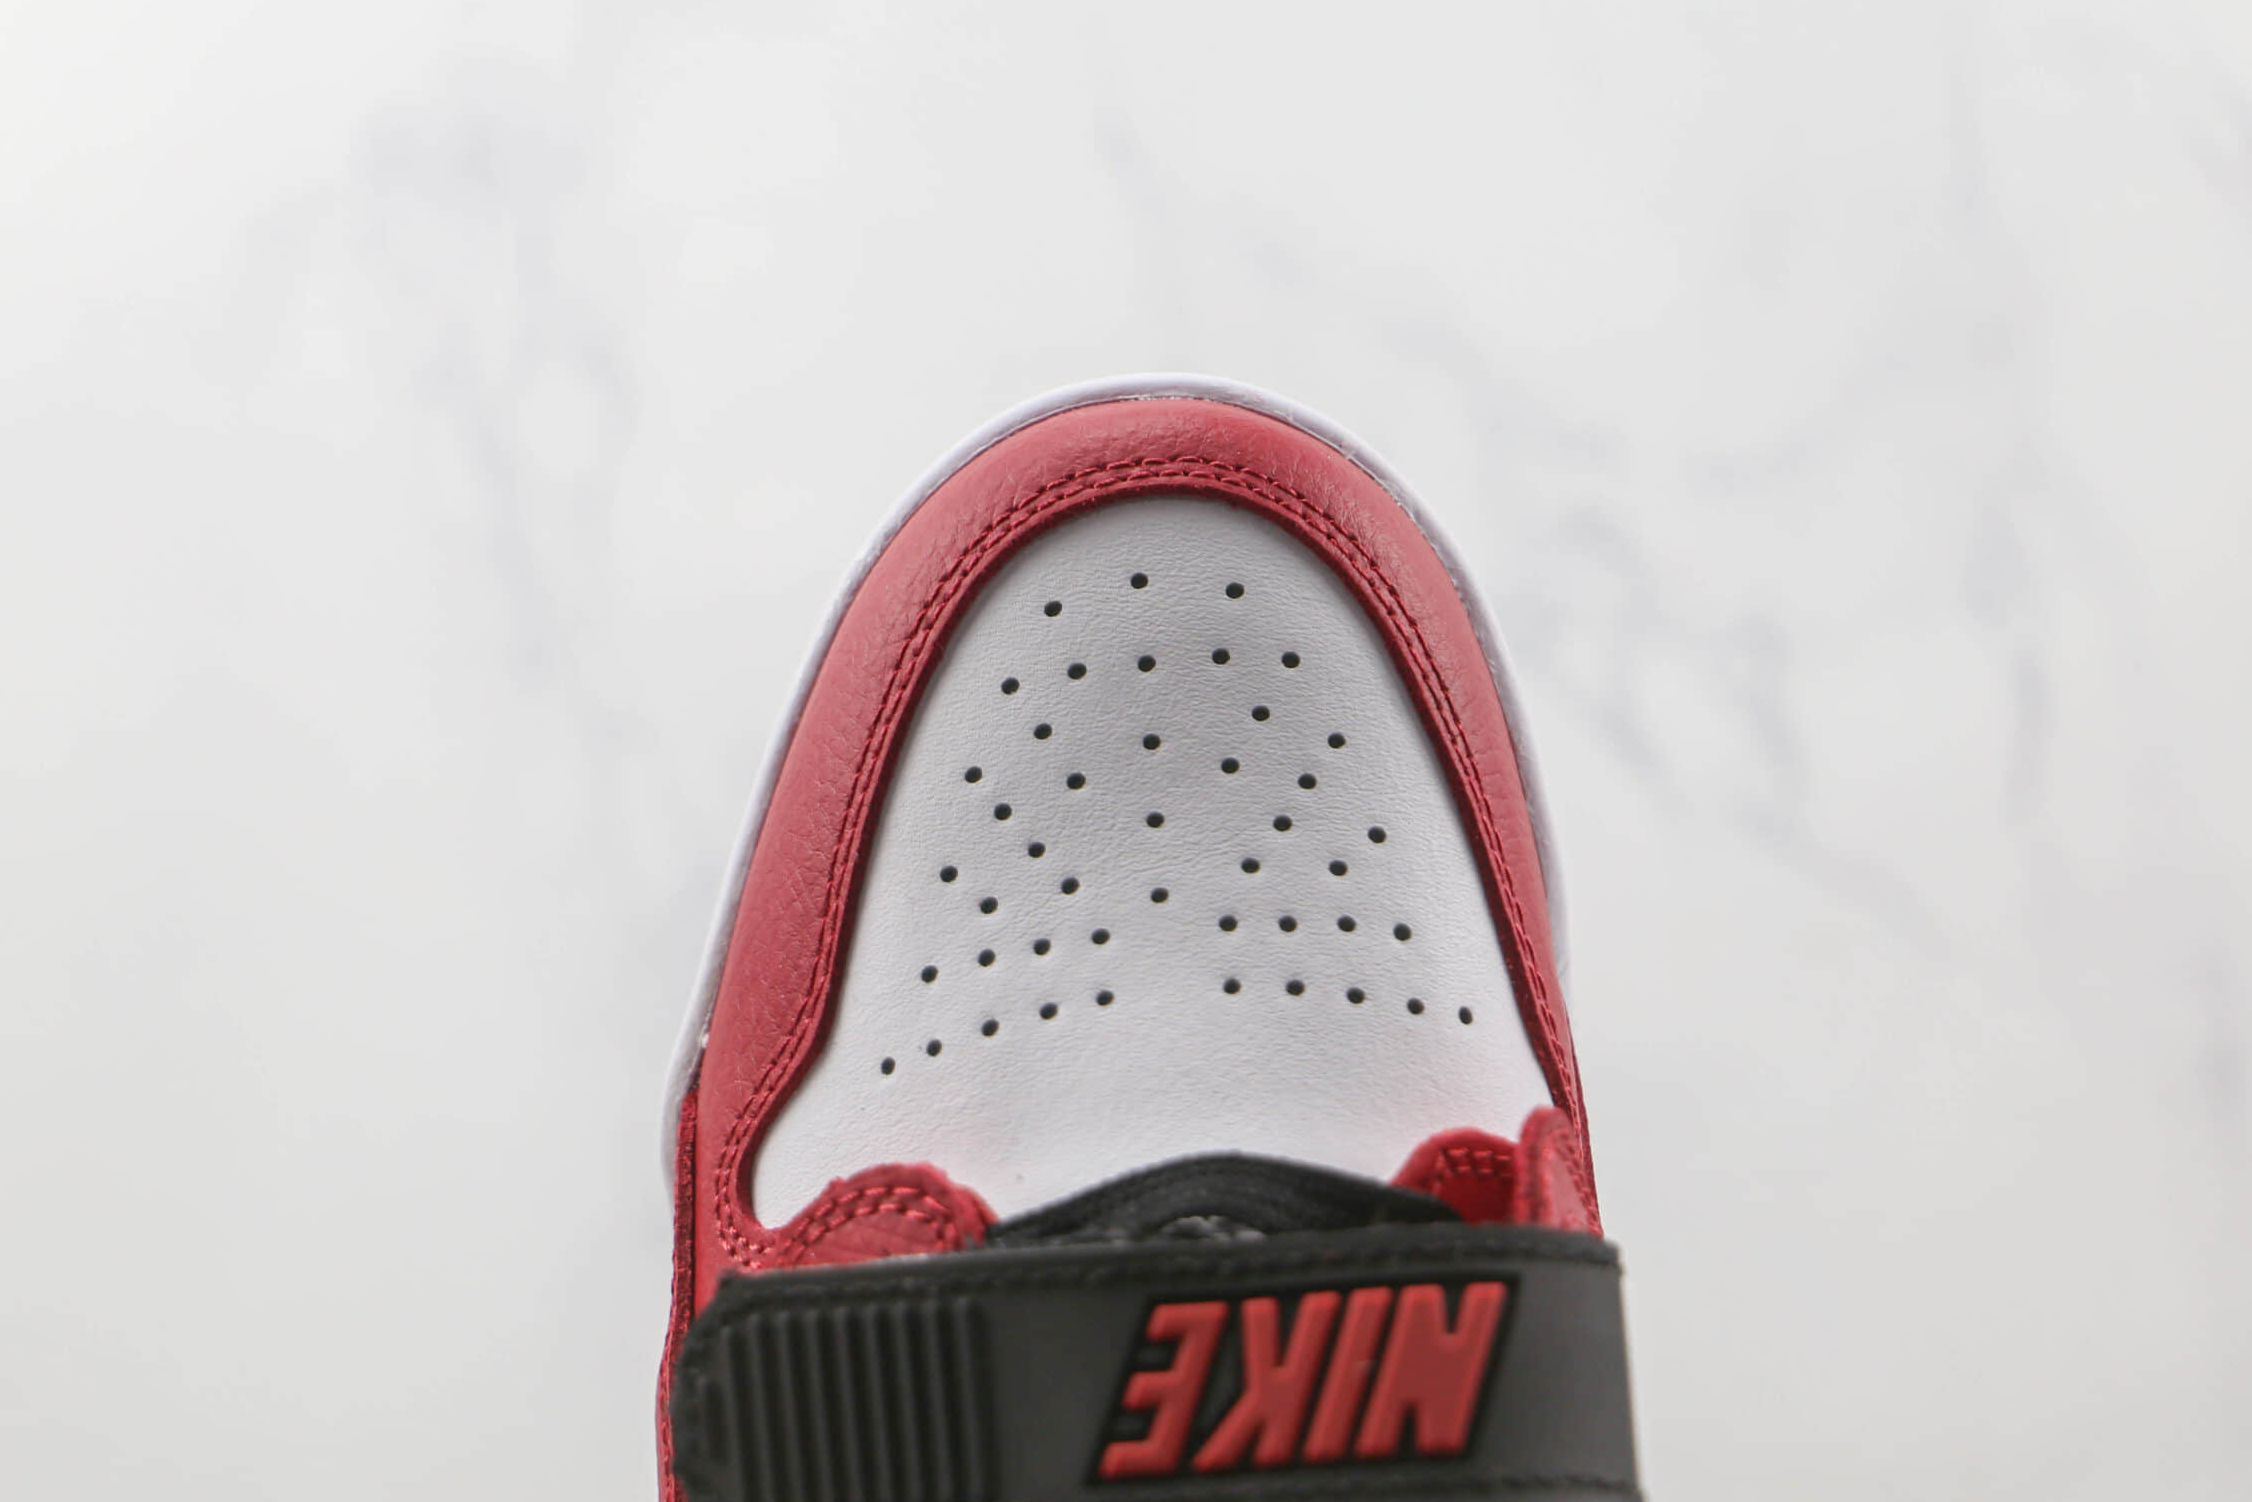 Jordan Legacy 312 Low 'Chicago Red' CD7069-116 - Shop Now for Authentic Sneakers!